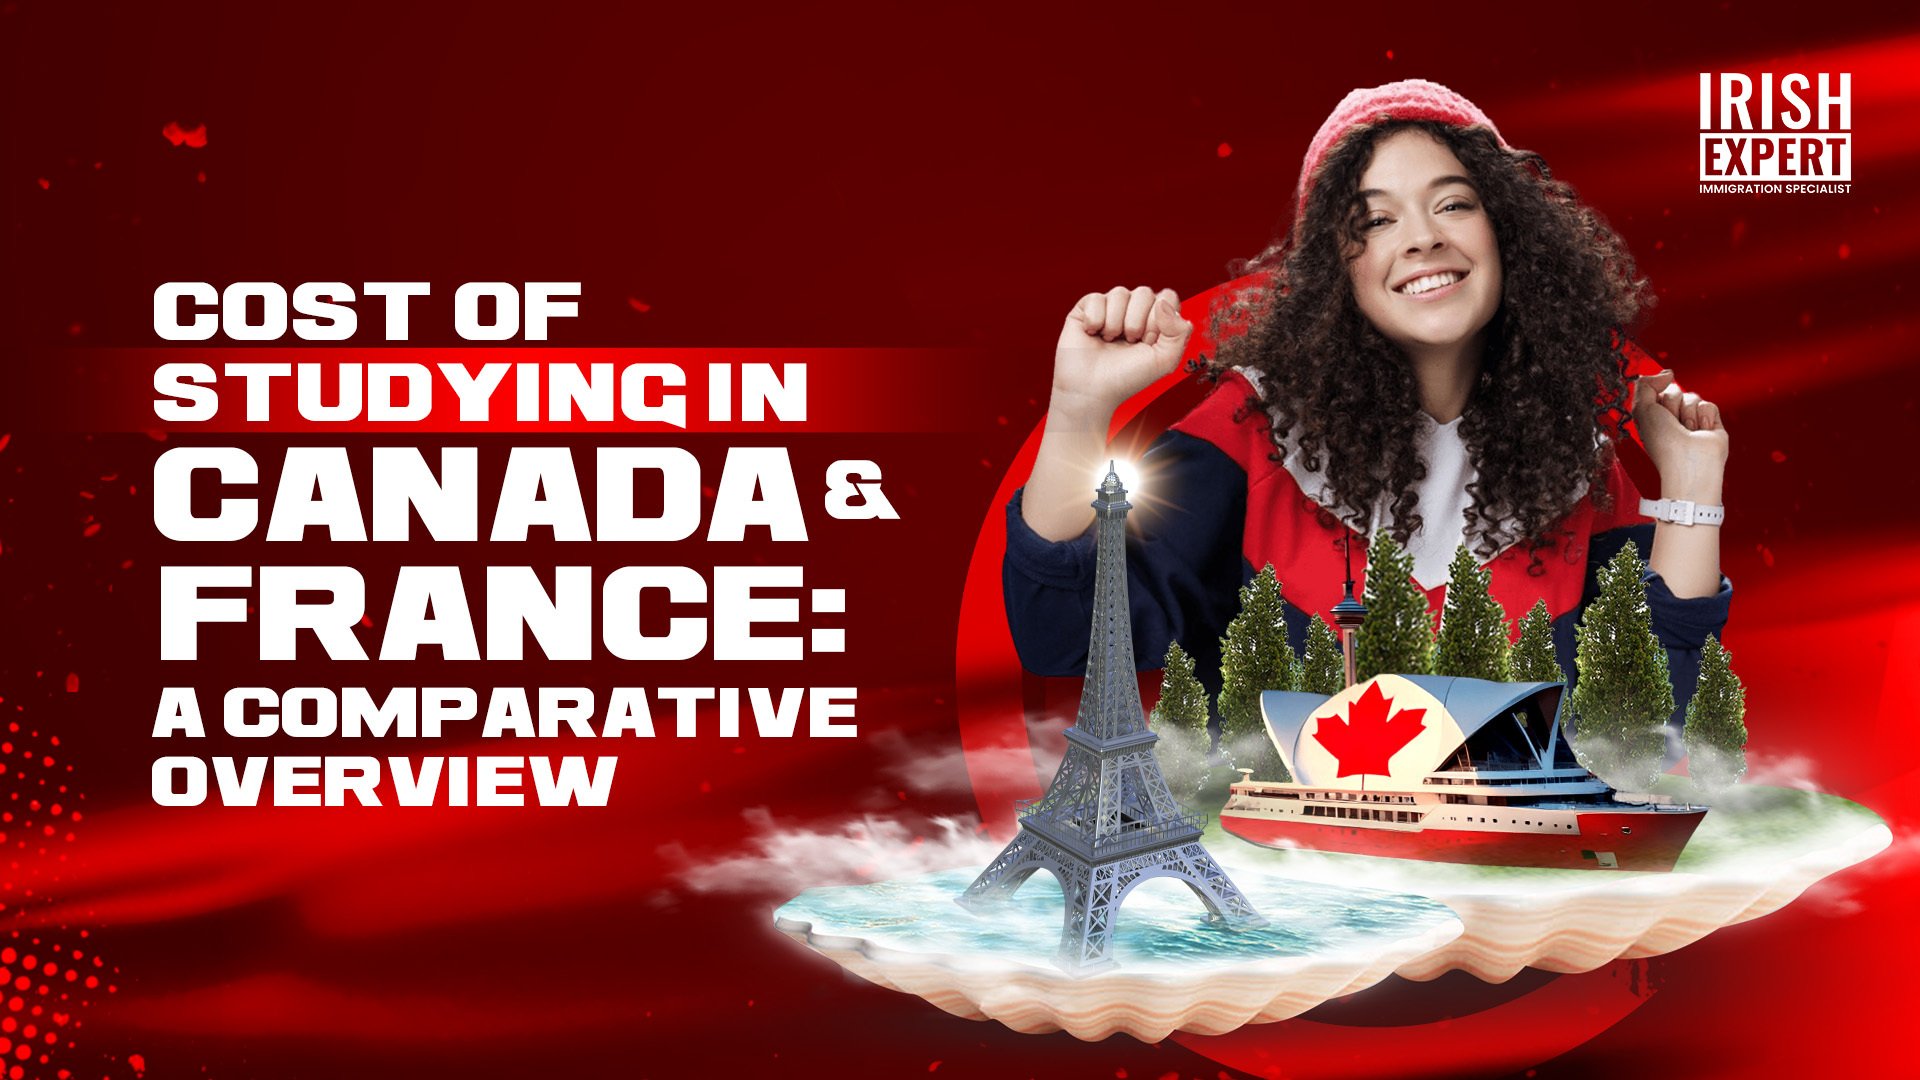 Cost of studying in Canada and France: A Comparative overview